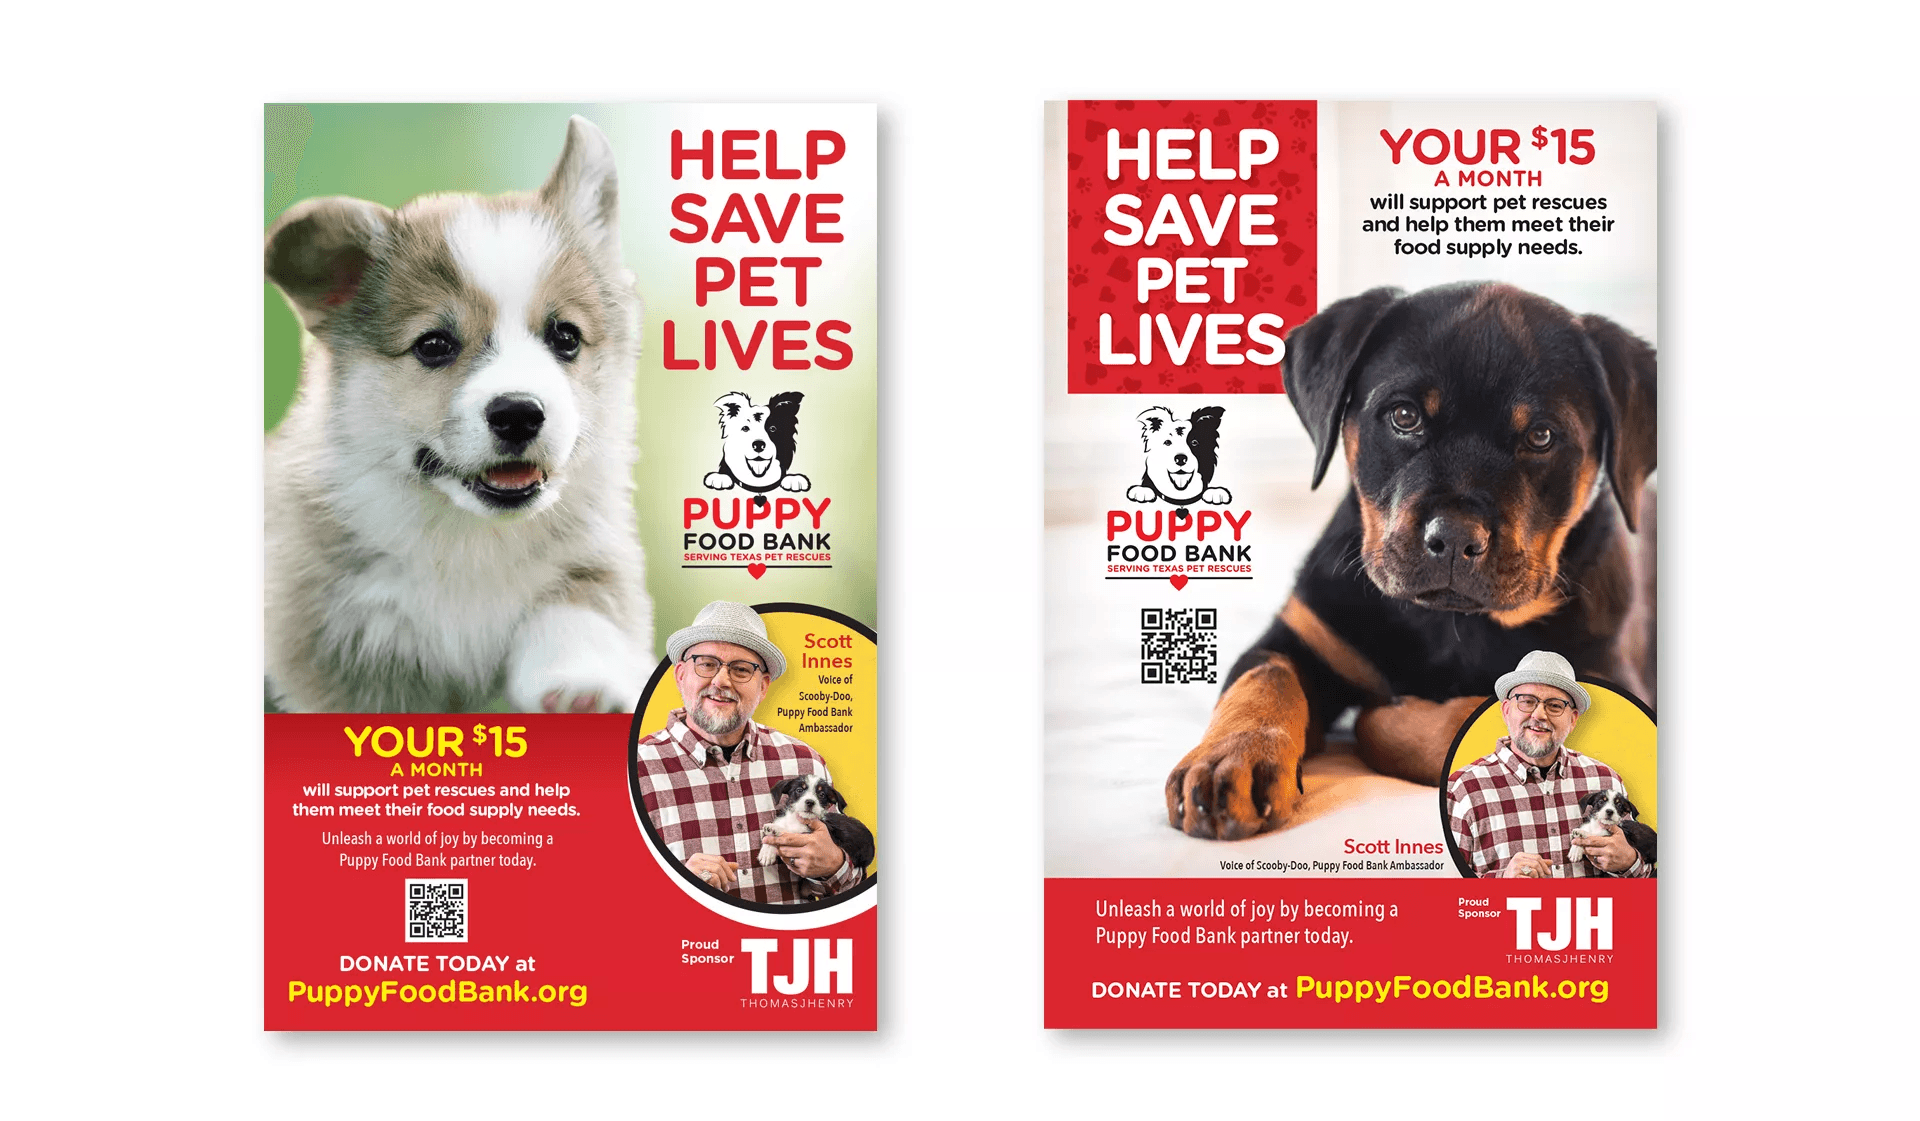 Puppy Food Bank, Save Pet Lives Ads